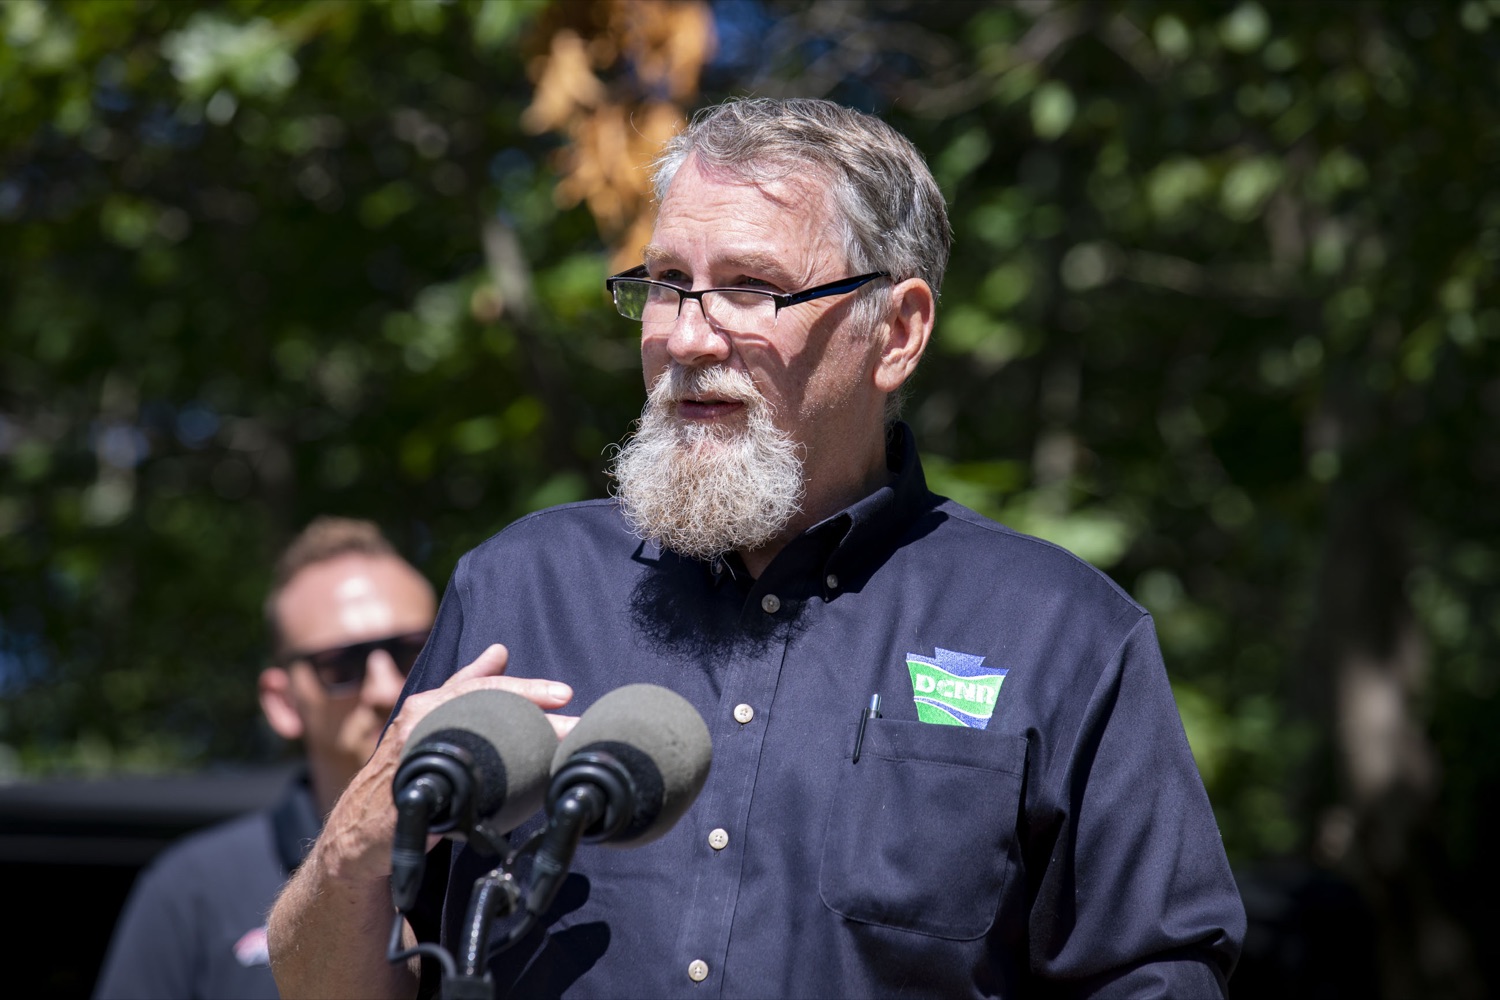 DCNR Deputy Secretary John Norbeck discusses the acquisition of a 5,600-acre tract of land that will be developed into a new motorized recreation area, in McAdoo, PA on August 12, 2022.<br><a href="https://filesource.amperwave.net/commonwealthofpa/photo/22090_dcnr_RecreationArea_18.jpg" target="_blank">⇣ Download Photo</a>